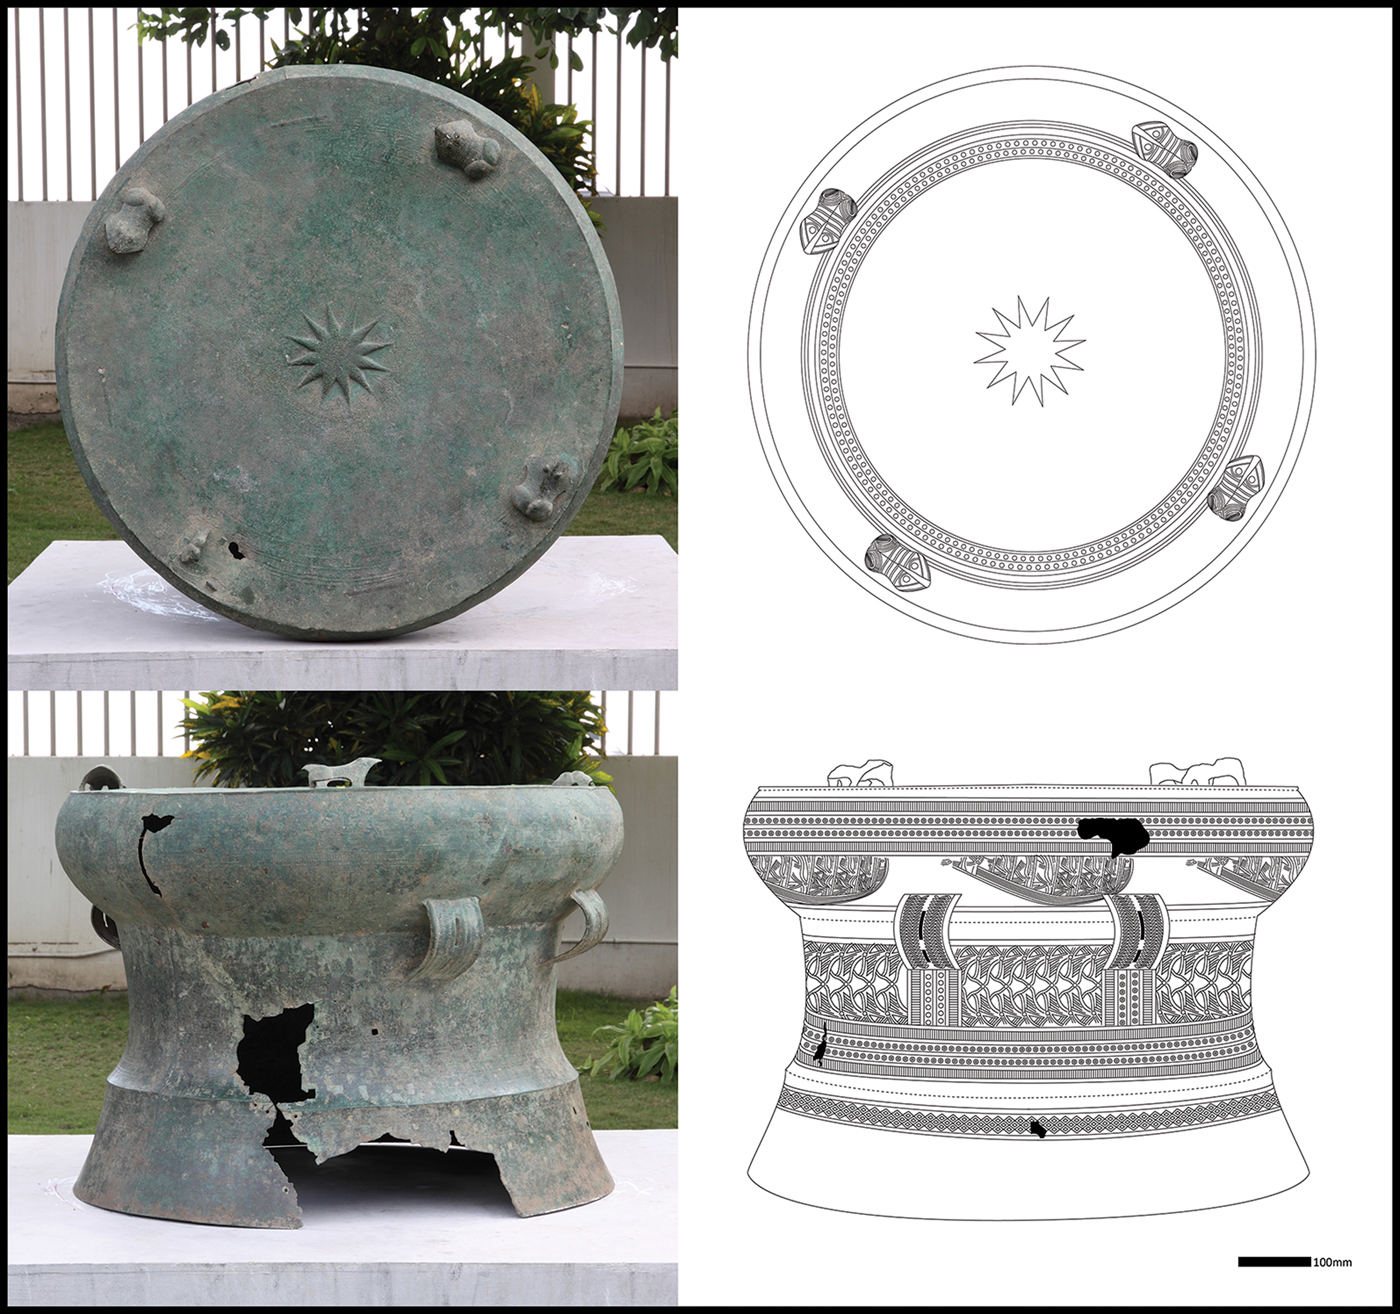 Dong Son drums from Timor-Leste: prehistoric bronze artefacts in 